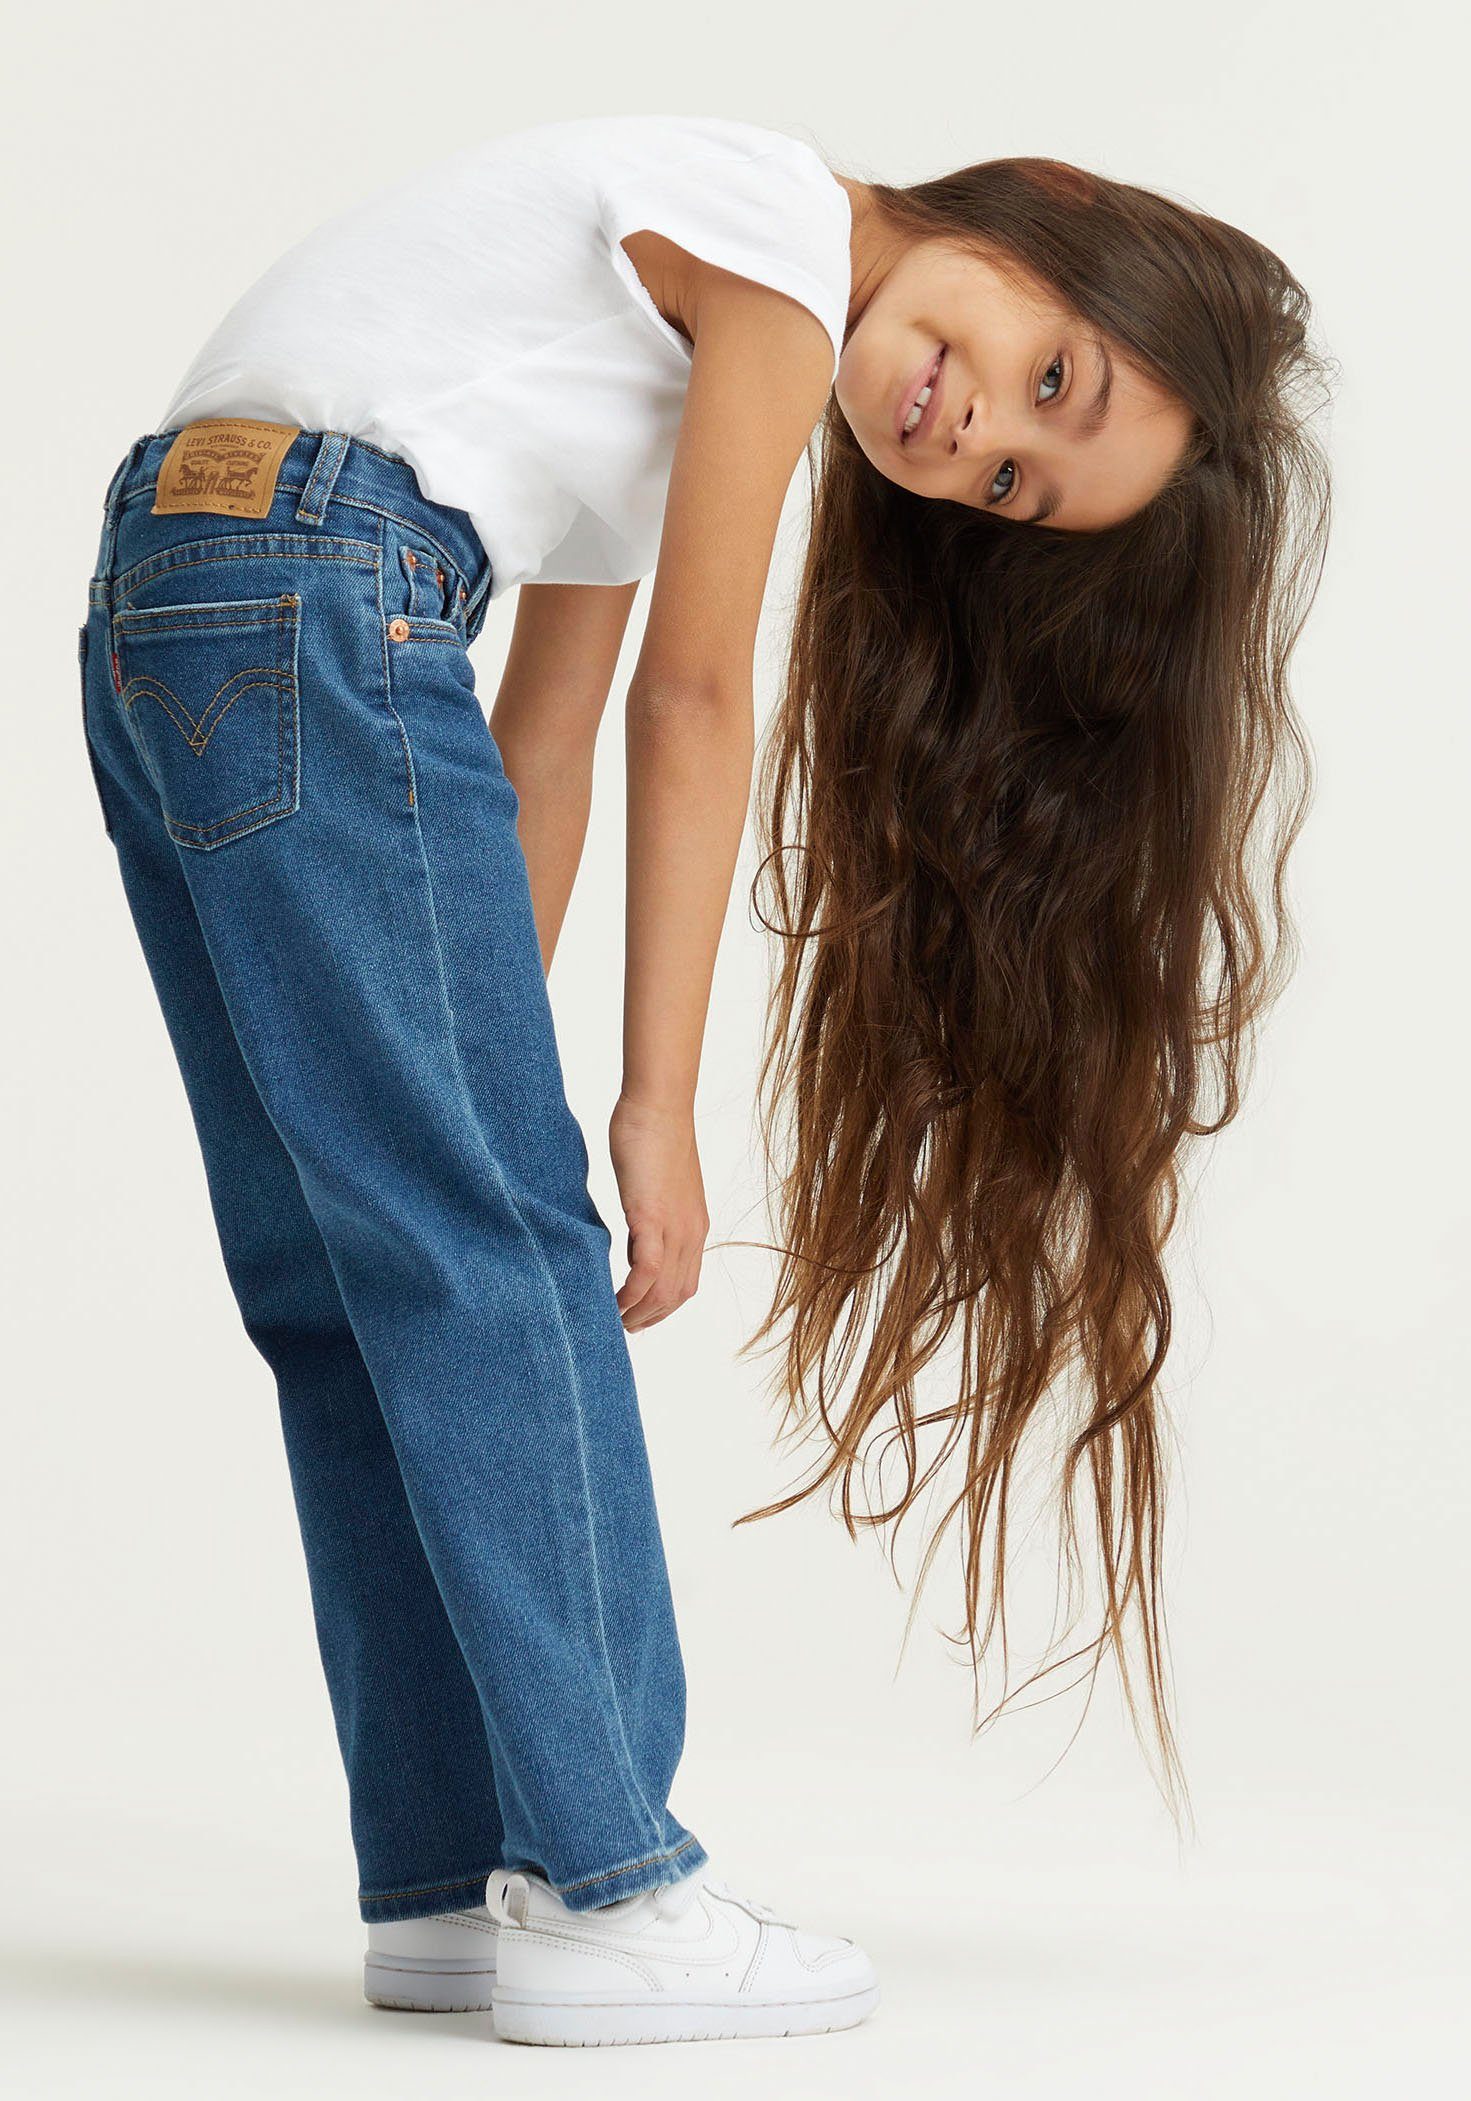 LVG for LEG Jeans Weite Levi's® WIDE JEANS GIRLS Kids